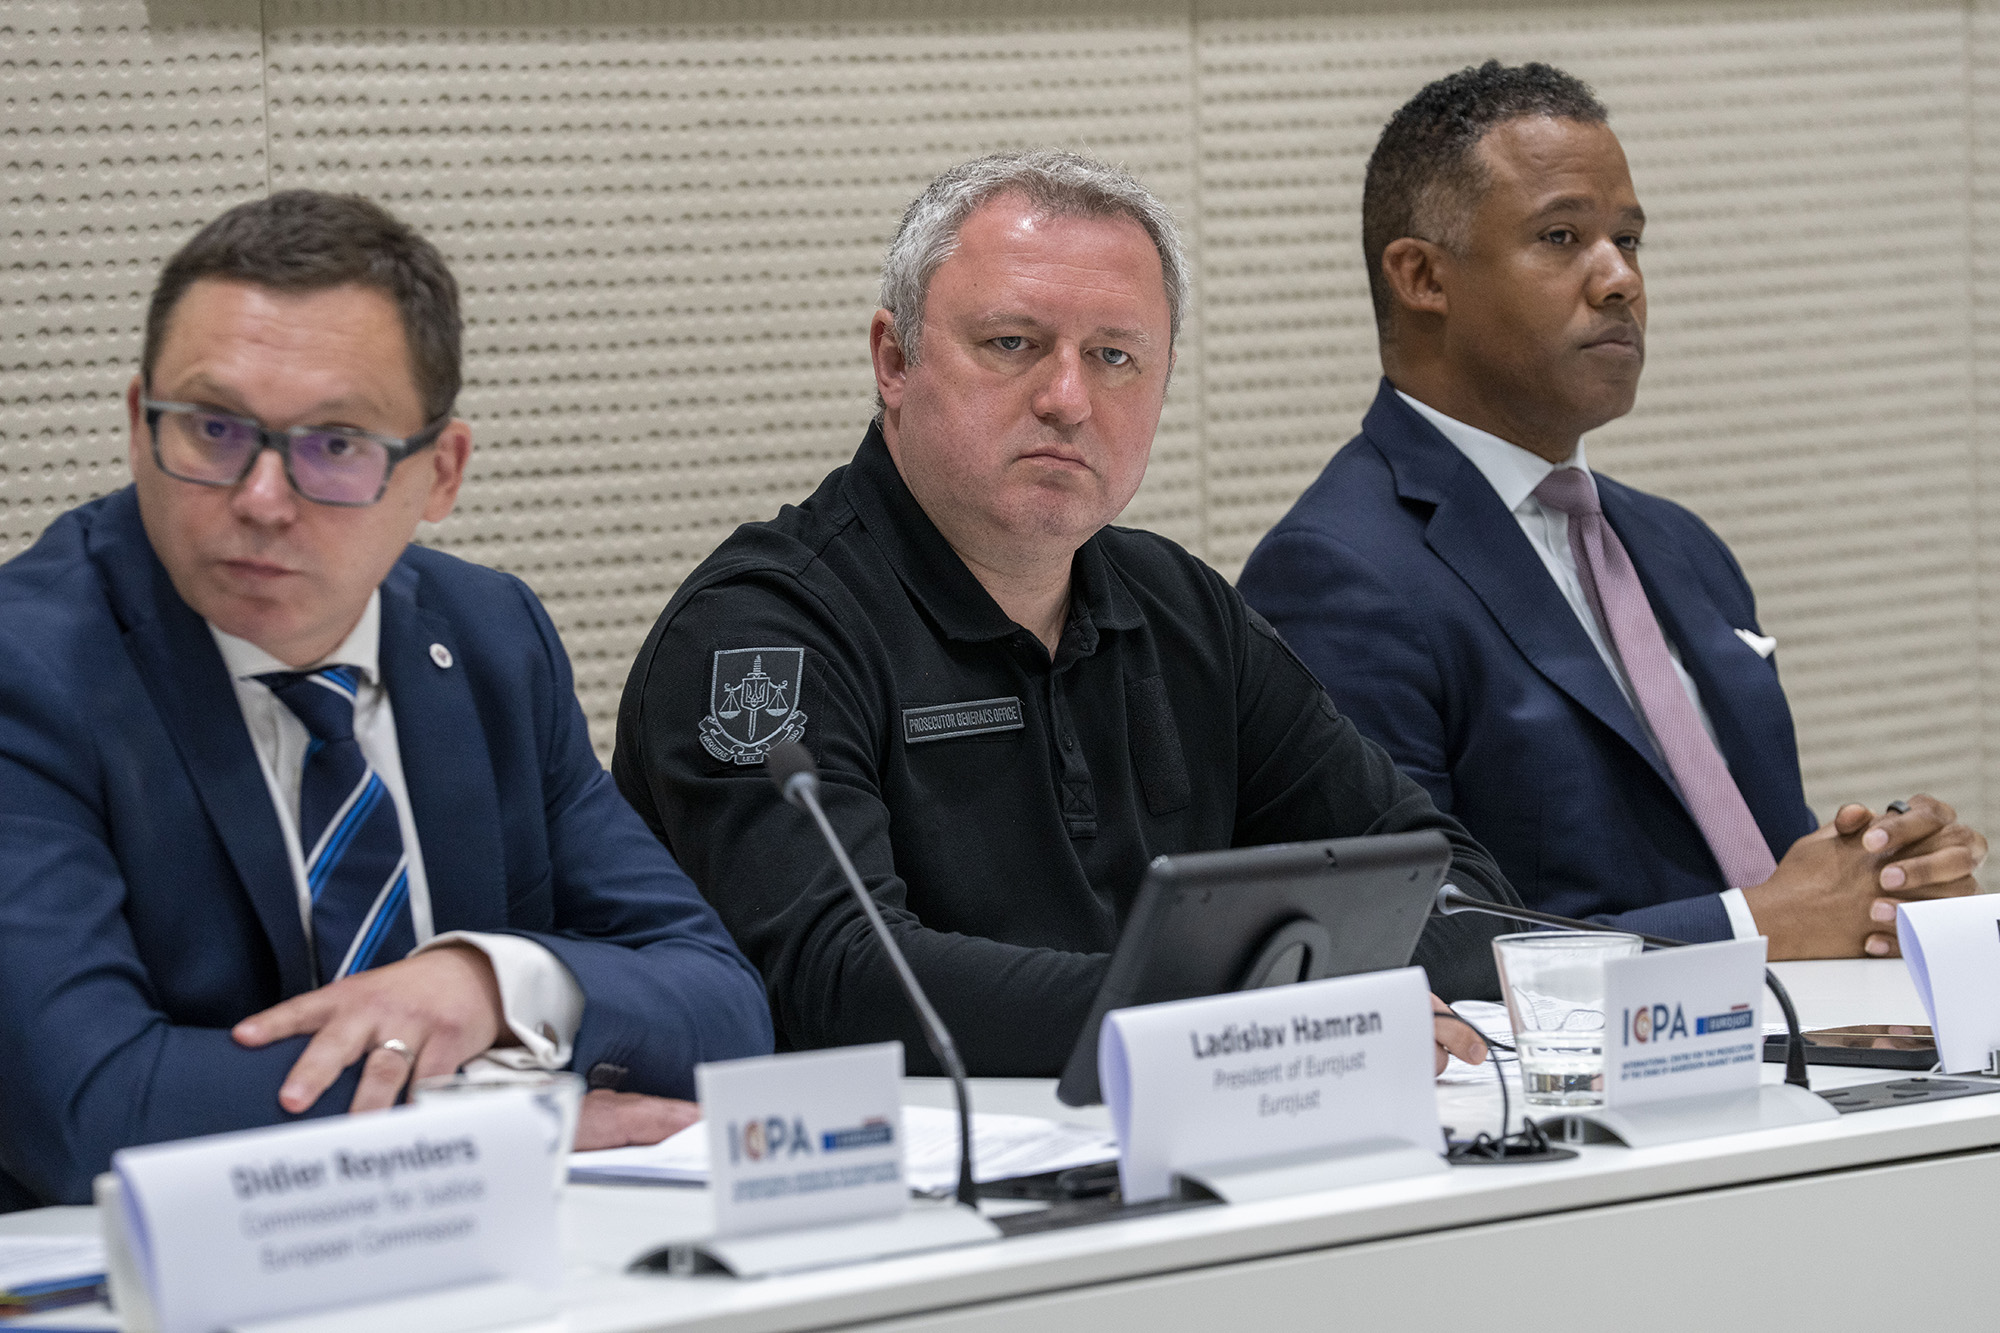 Ladislav Hamran, left, President of Eurojust, Andriy Kostin, center, Prosecutor General of the Ukraine, and Kenneth A. Polite Jr., Assistant Attorney General, of the U.S., attend a joint press conference in The Hague, Netherlands, on July 3.